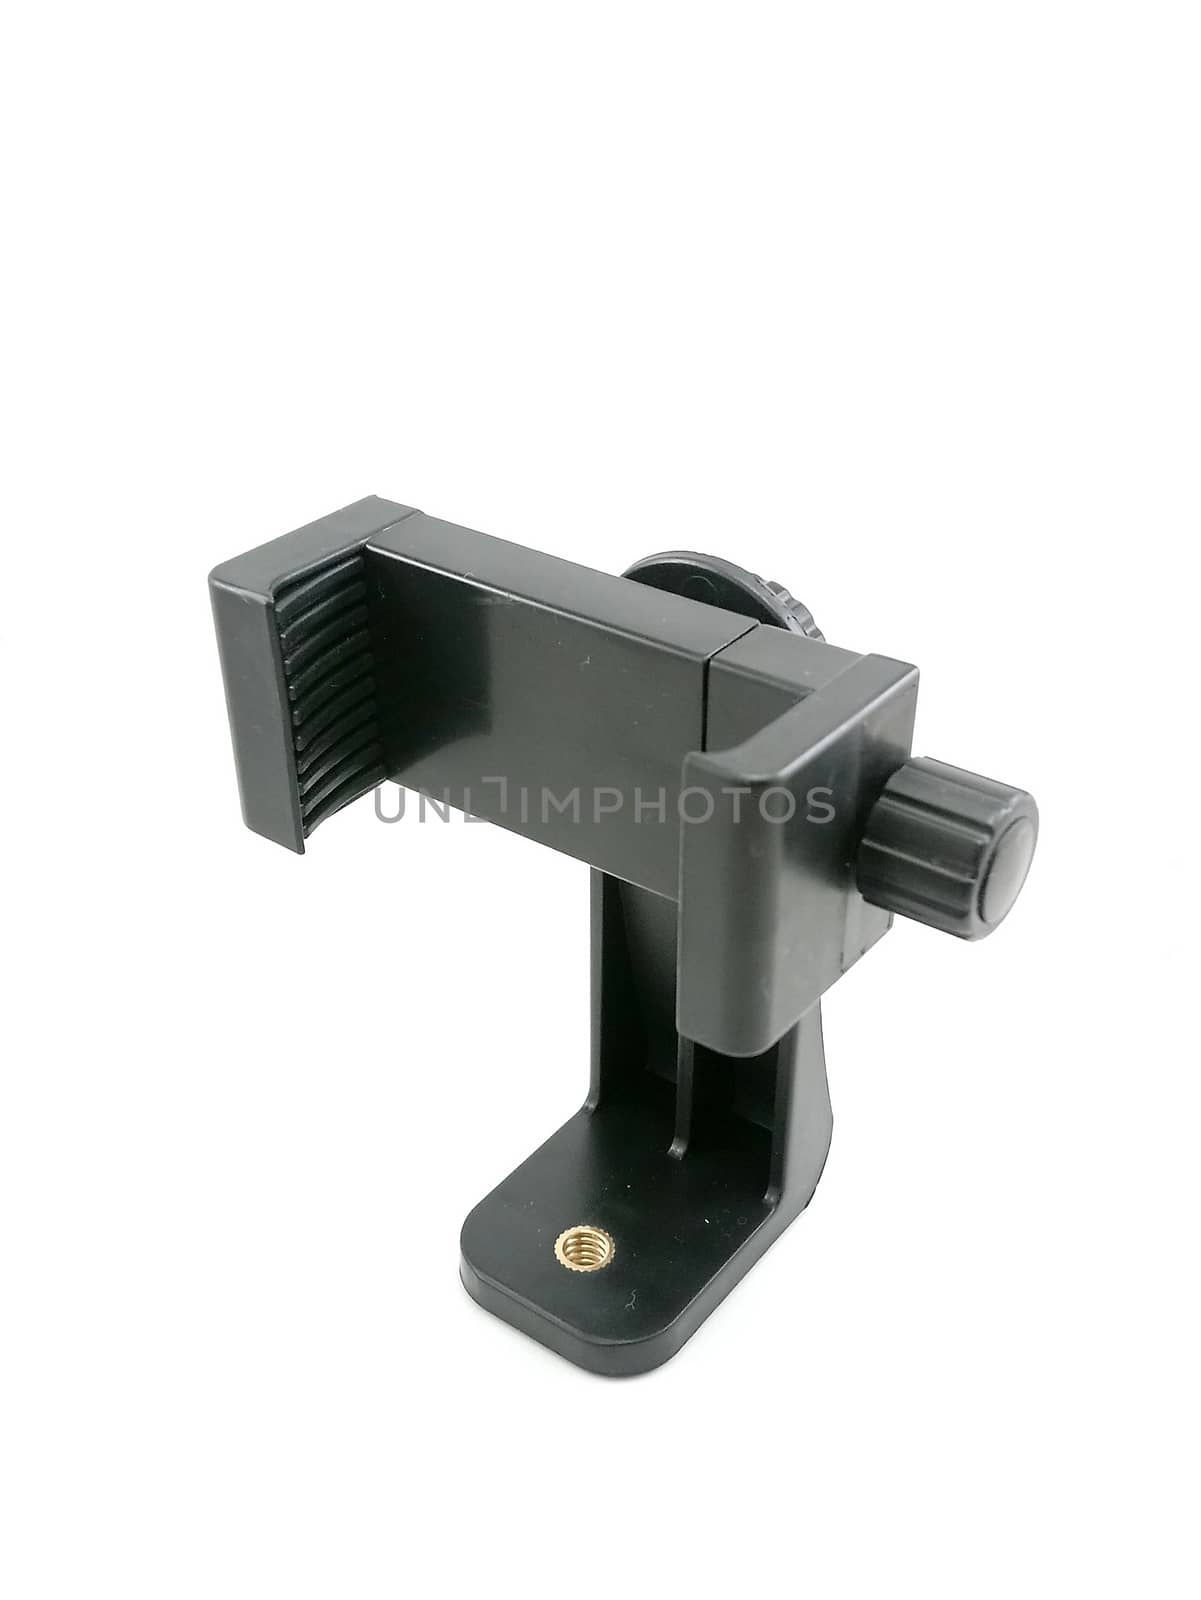 Smartphone black holder attachment for tripod use to record shots with stability